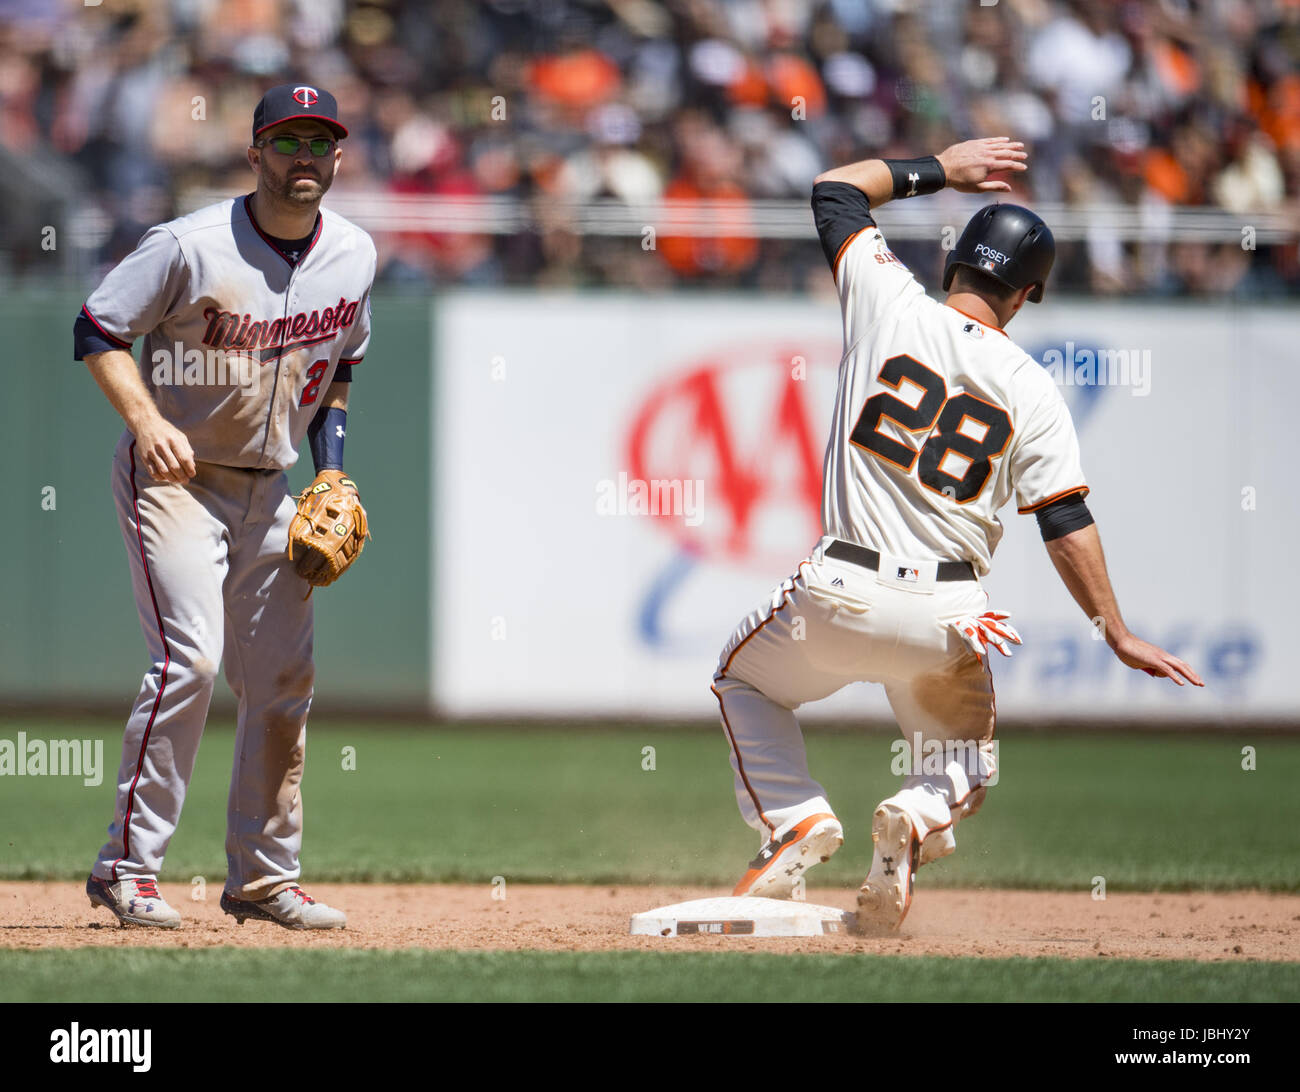 San Francisco, California, USA. 11th June, 2017. San Francisco Giants catcher Buster Posey (28) comes into second base on a sacrifice hit, during a MLB baseball game between the Minnesota Twins and the San Francisco Giants on ''Dog Days of Summer'' at AT&T Park in San Francisco, California. Valerie Shoaps/CSM/Alamy Live News Stock Photo